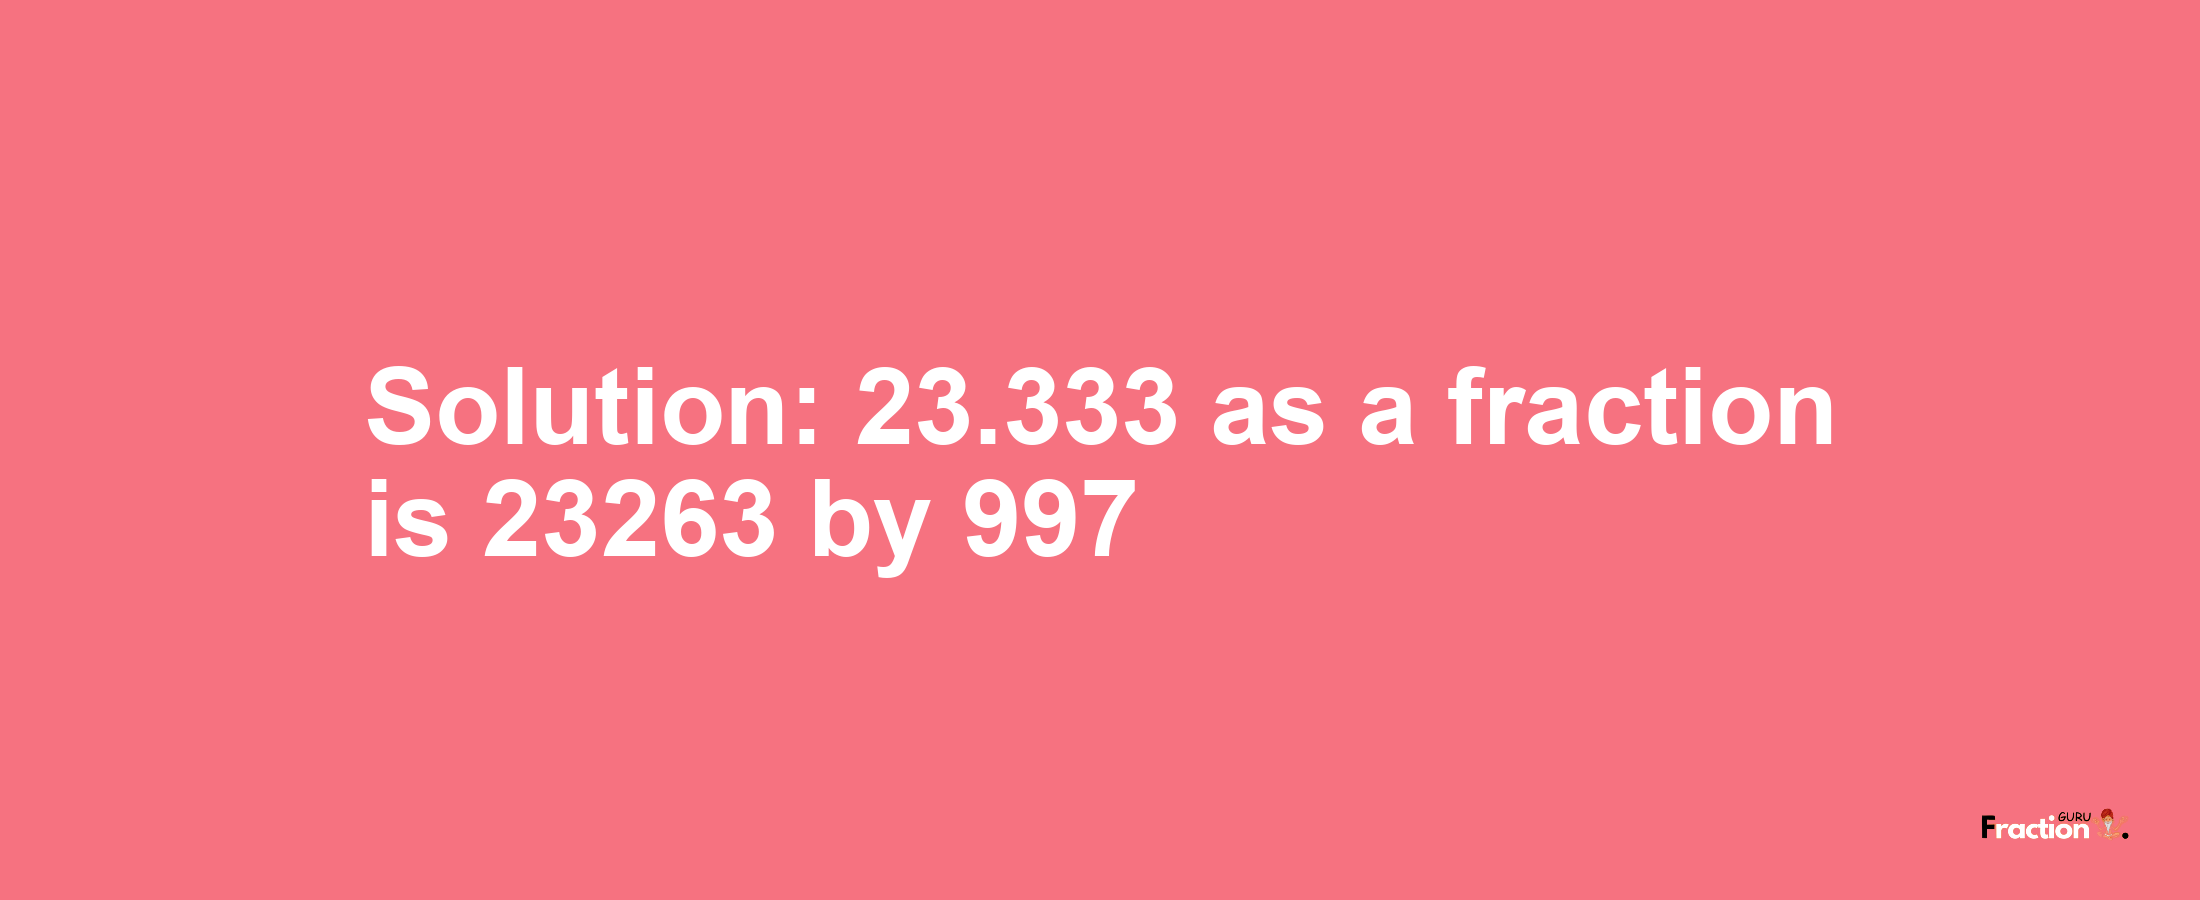 Solution:23.333 as a fraction is 23263/997